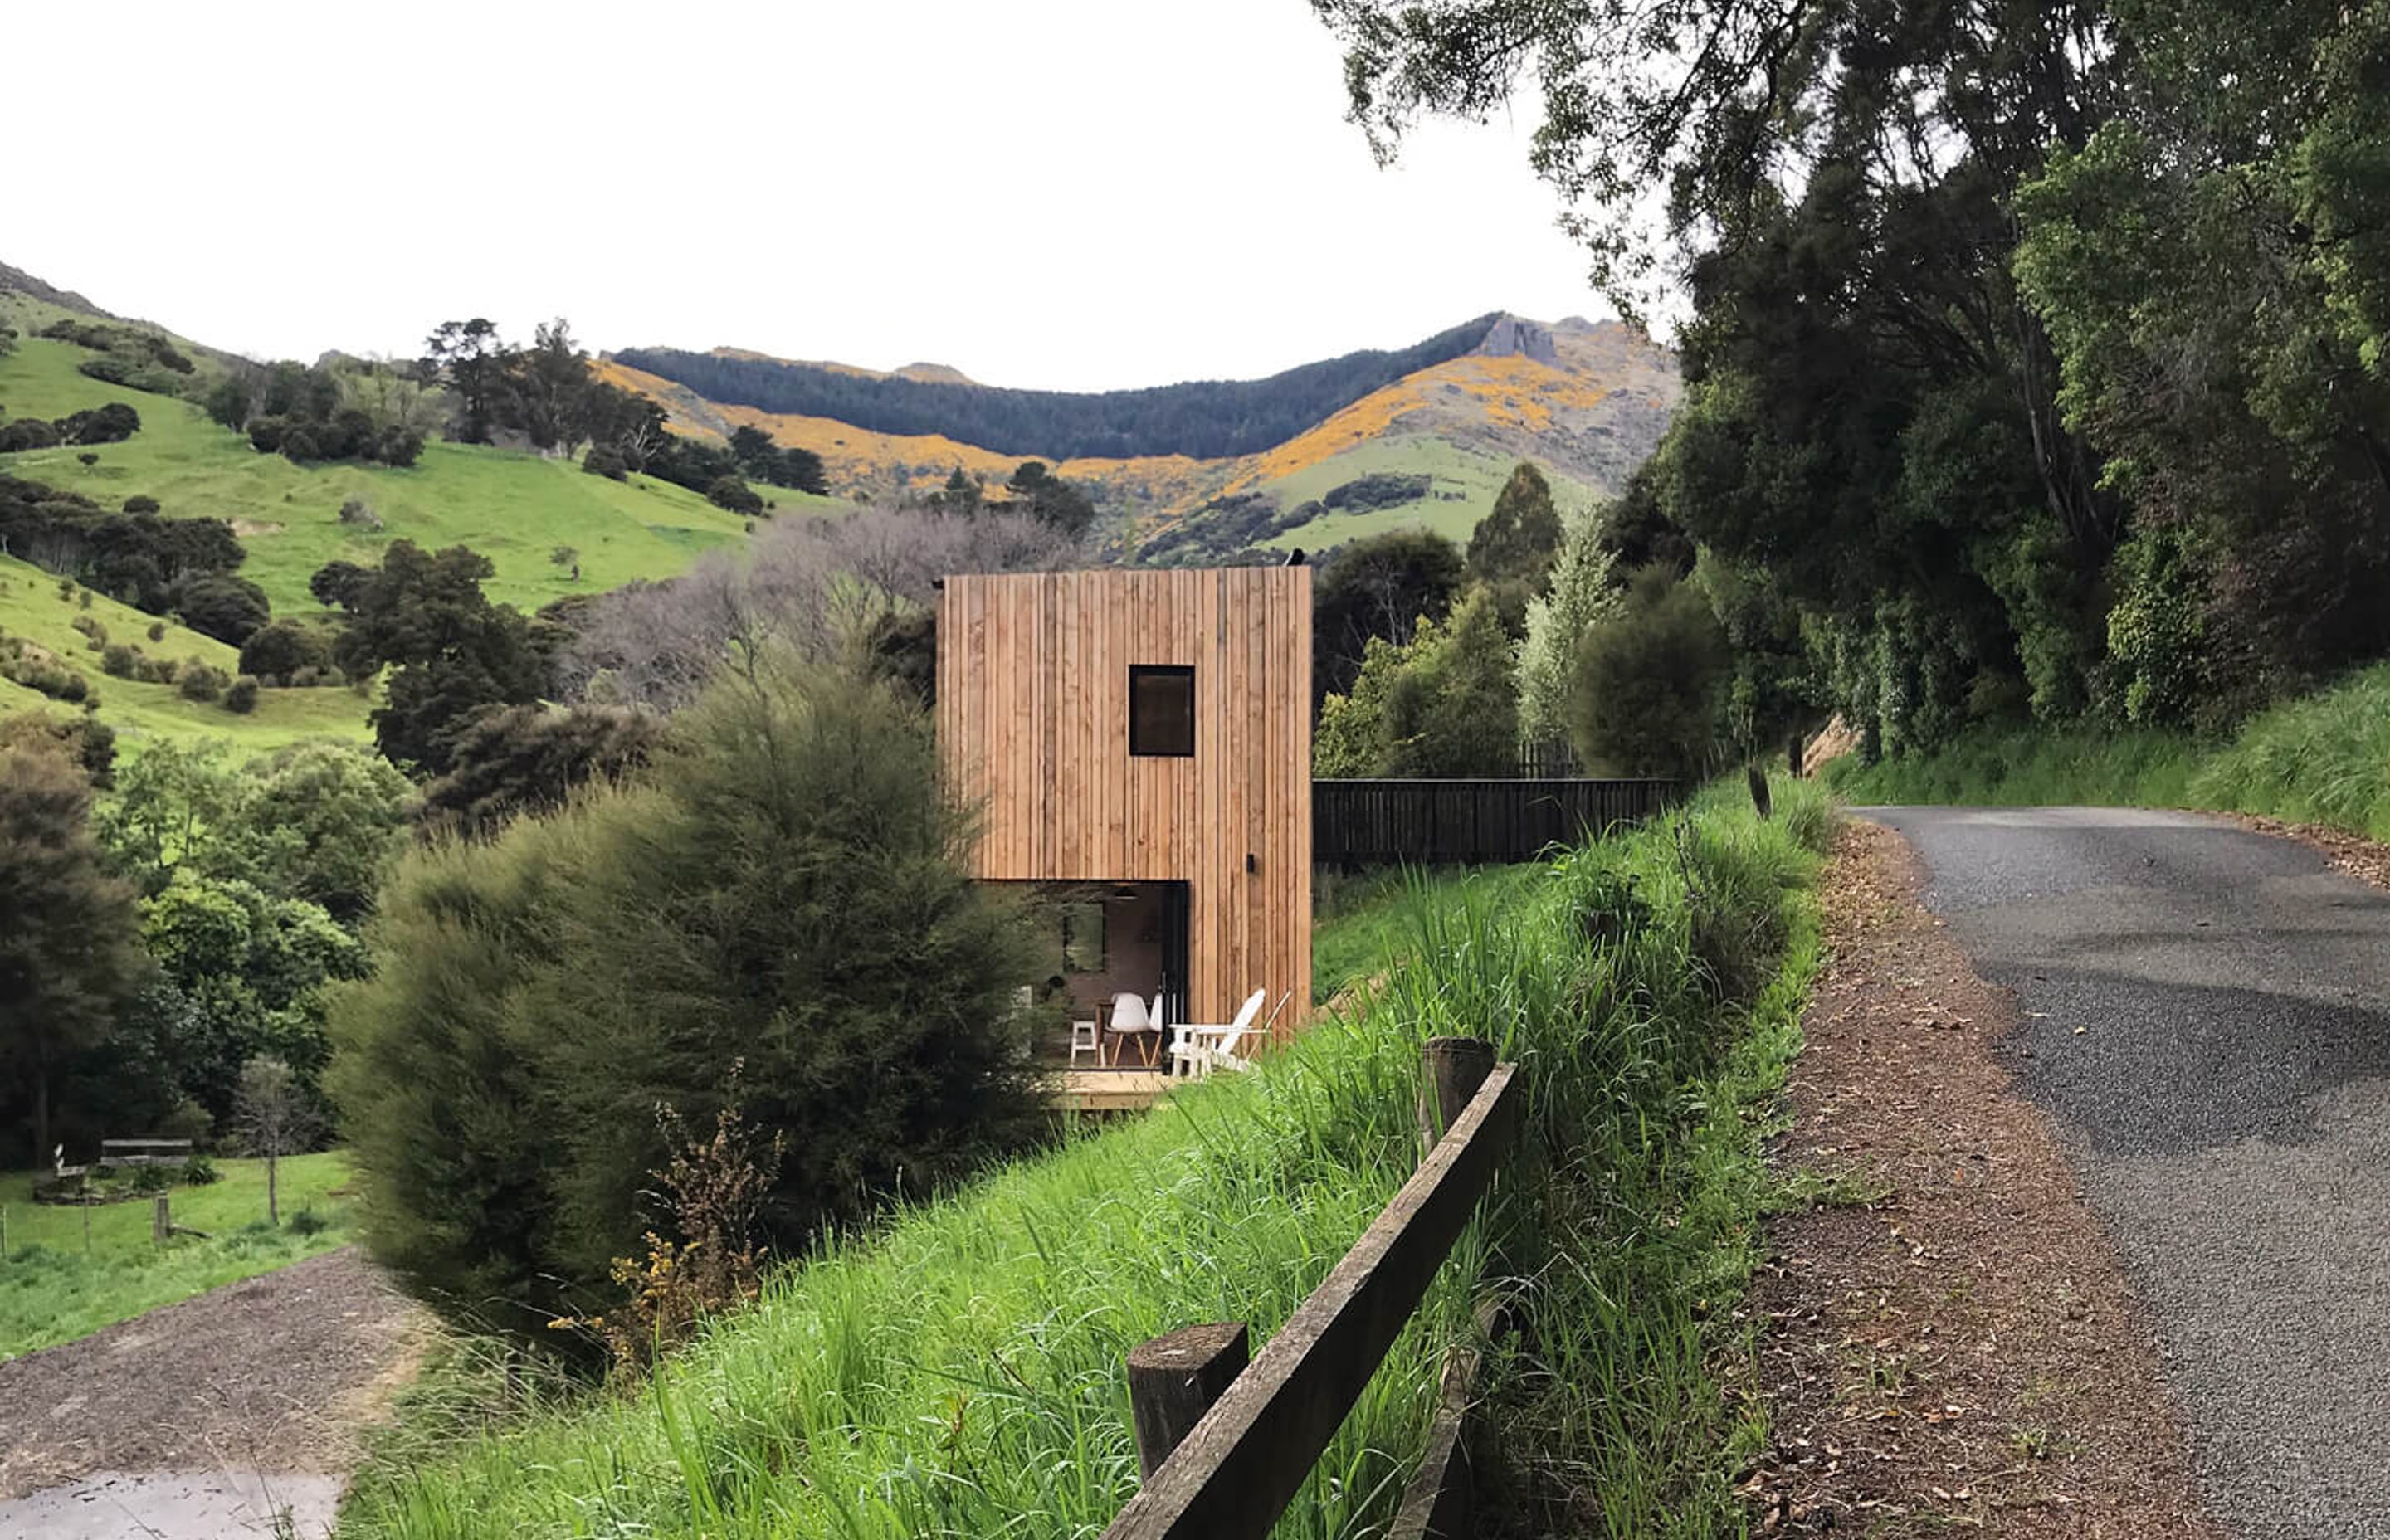 Akaroa Bach from the road showing the verticality of the home nestled into the steep slope with a bridged entranceway from the roadside.